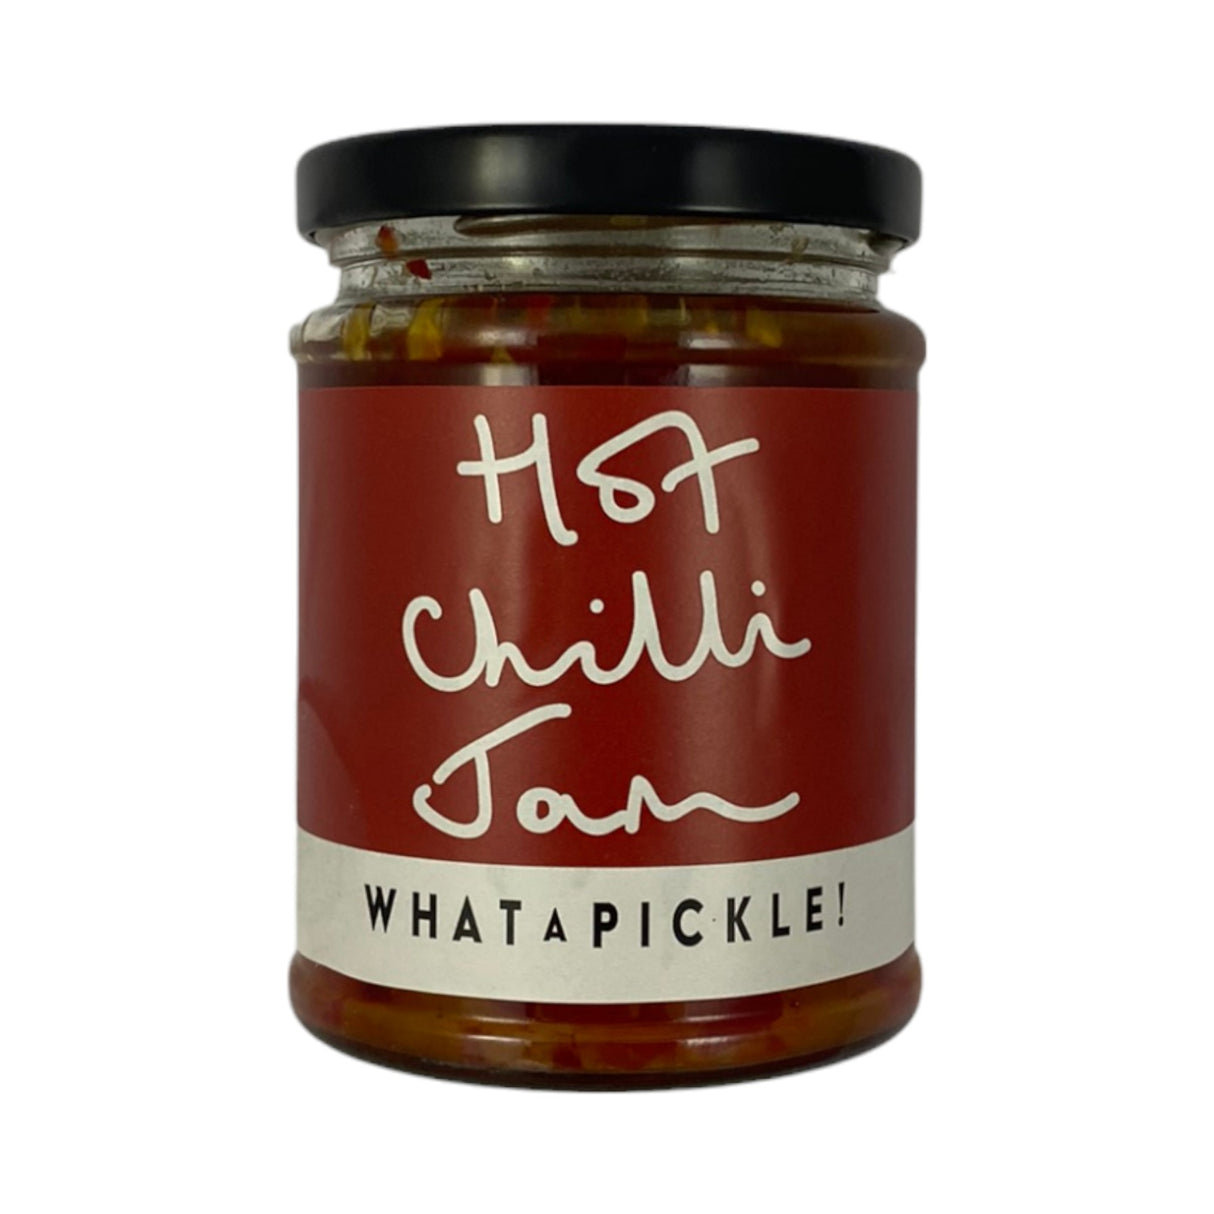 What a Pickle! - Hot Chilli Jam 270g